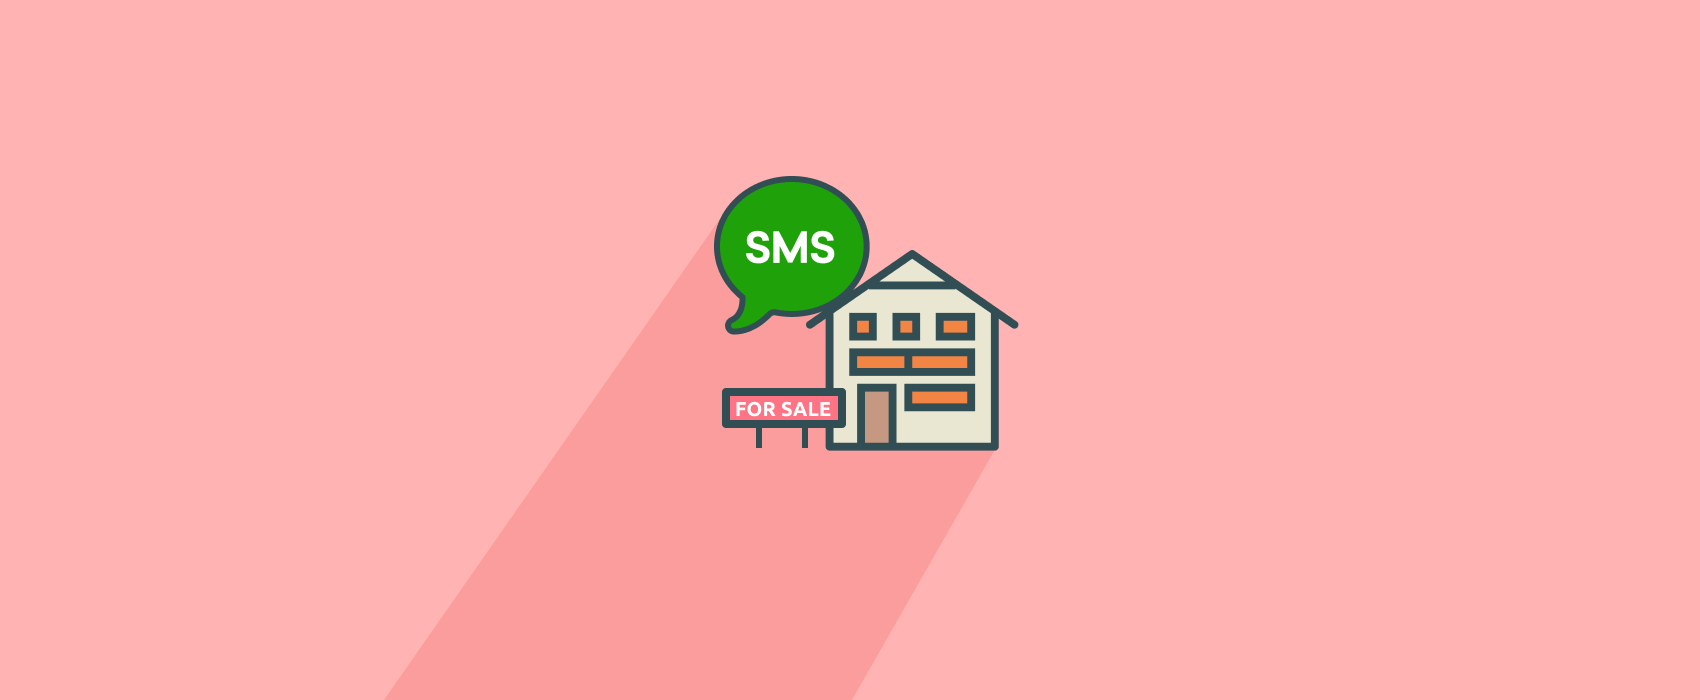 how to improve speed to lead with sms marketing 1